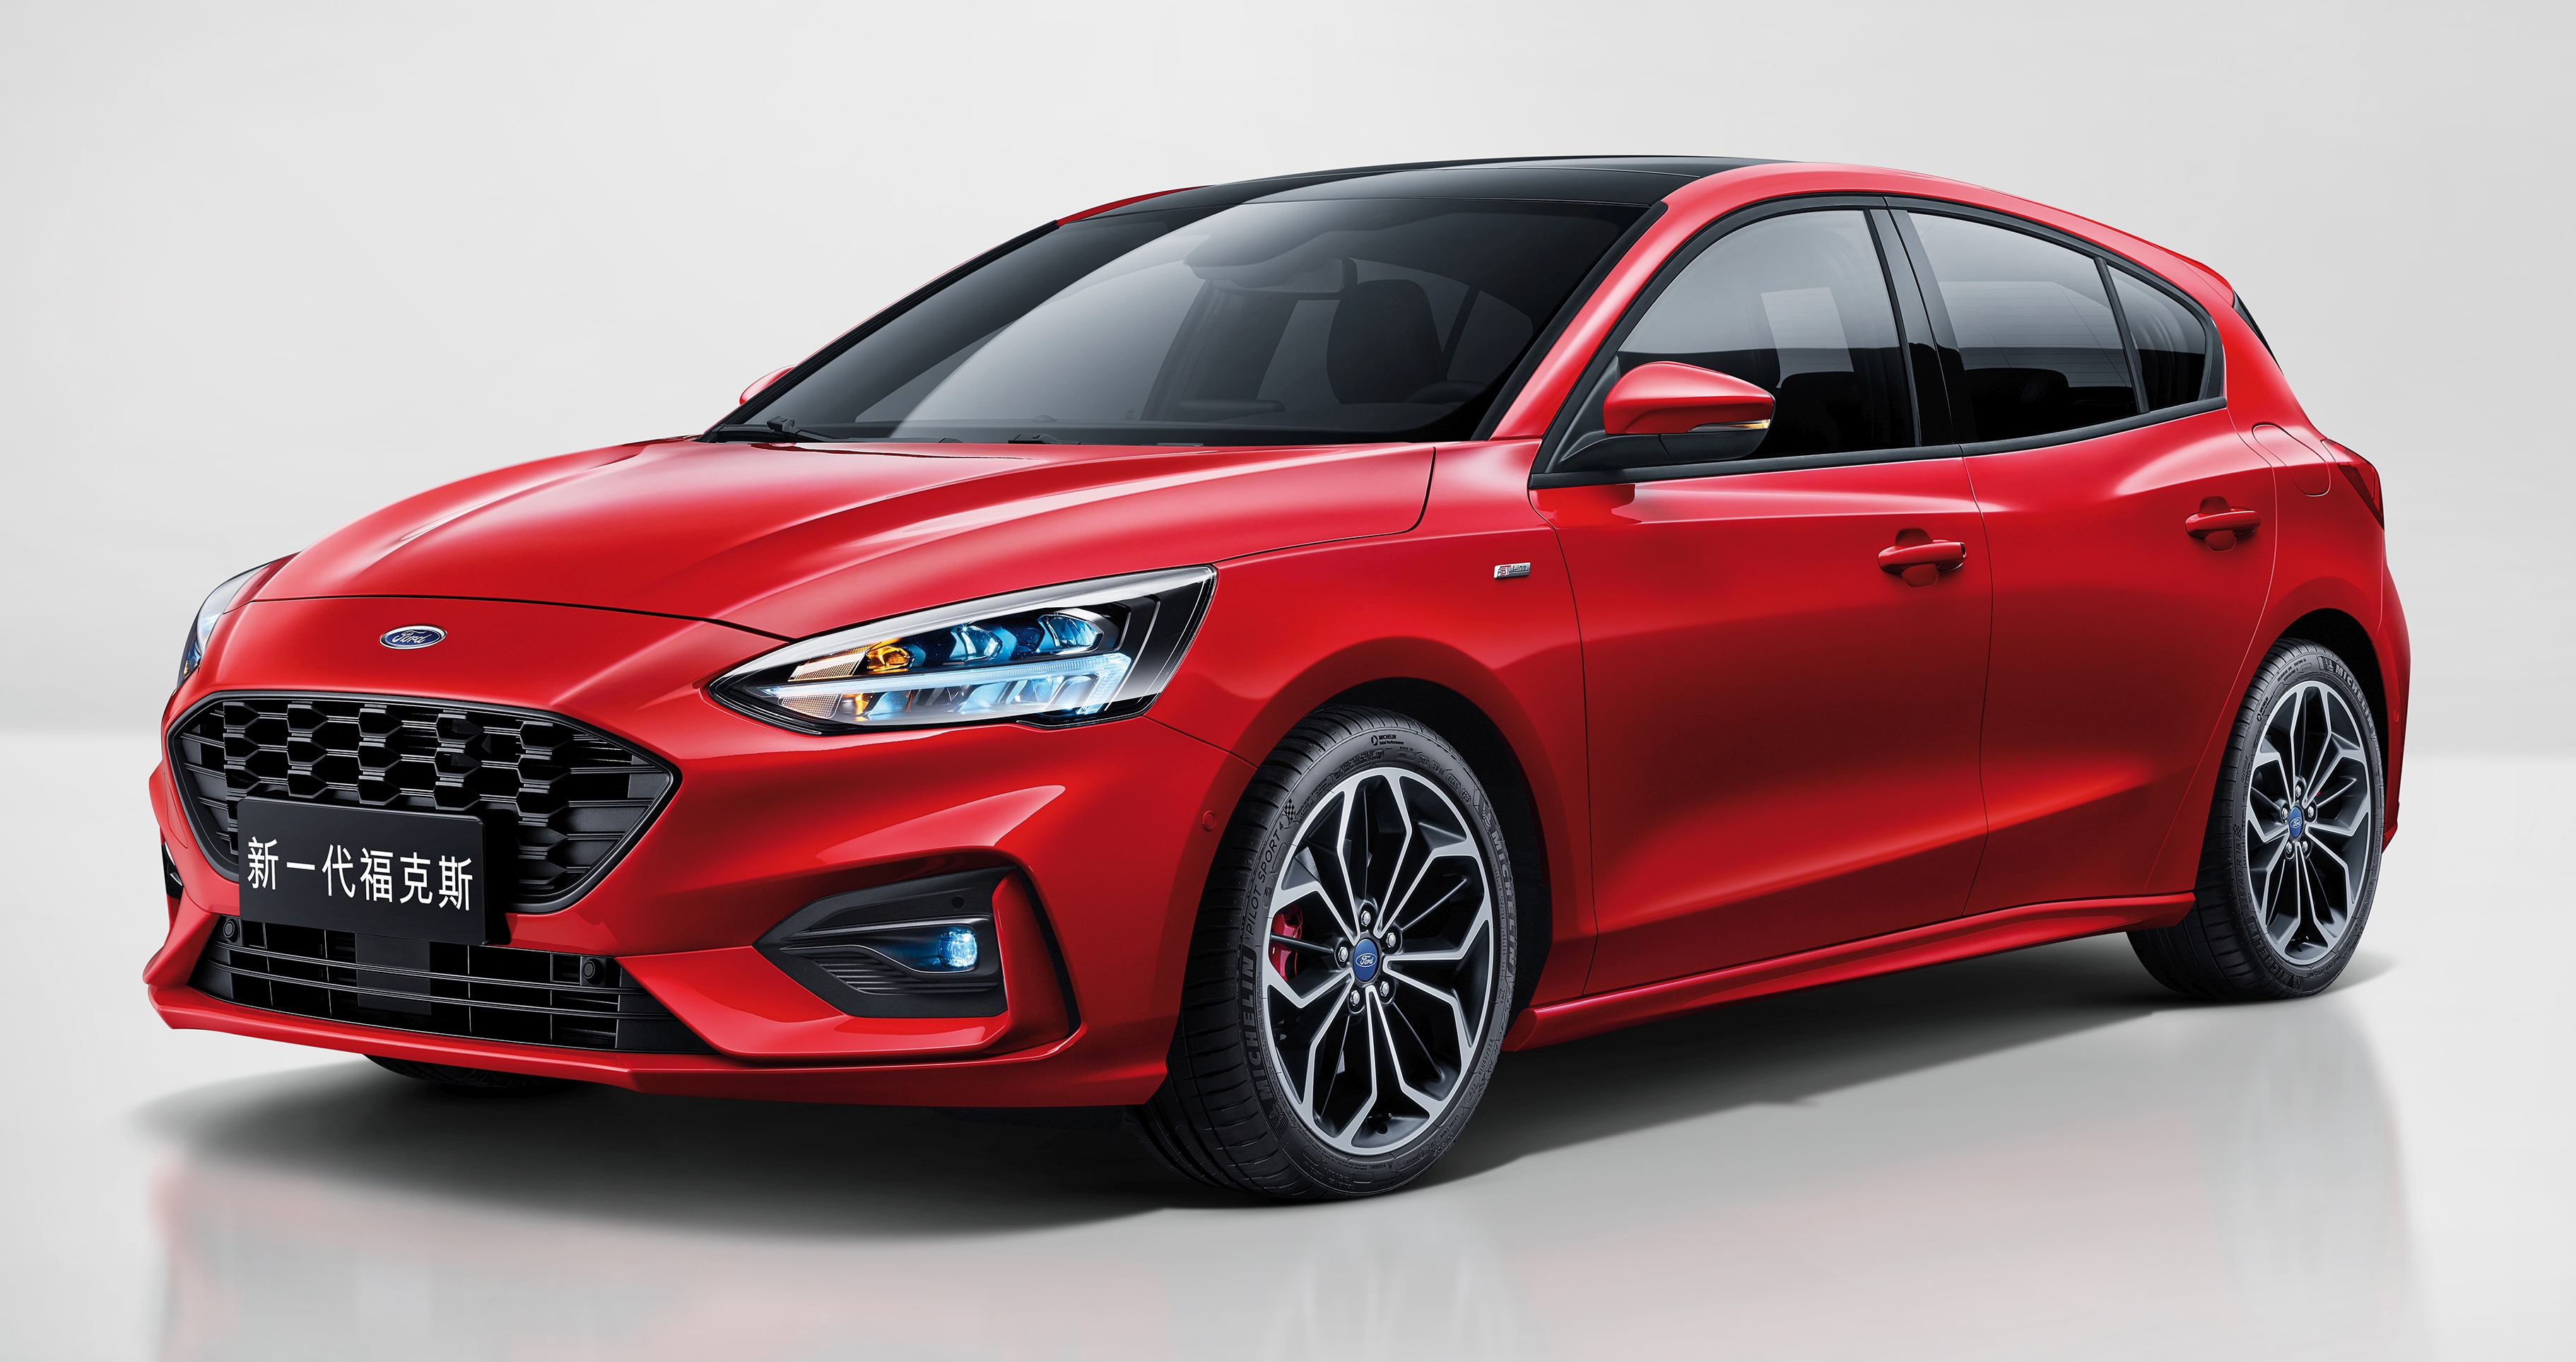 New Ford Focus Mk4 won’t be made, sold in Thailand wBlogs